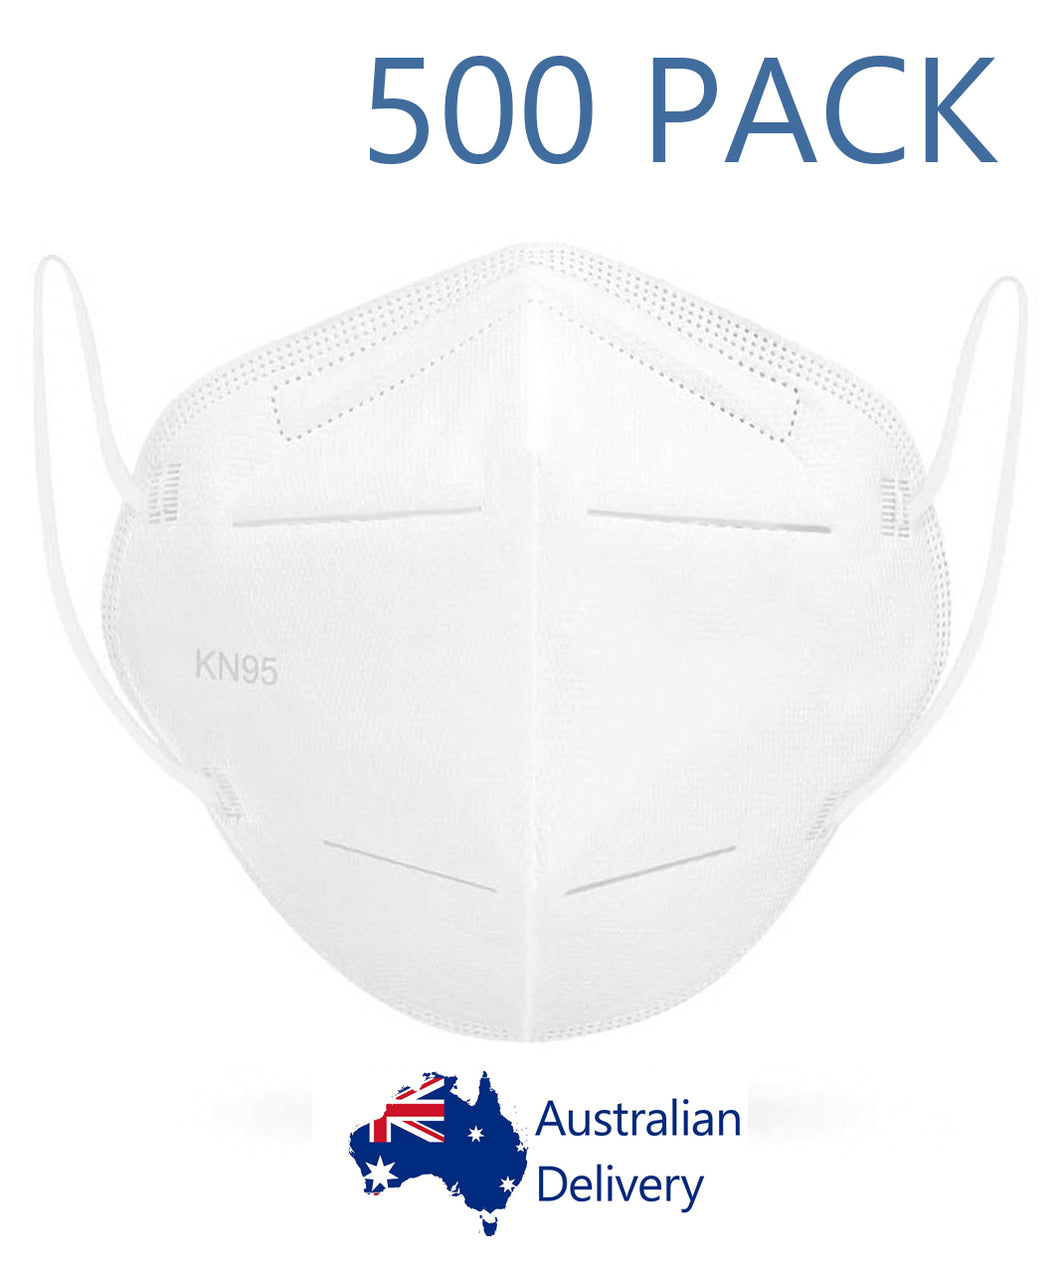 KN95 Masks (500 pack)                IN STOCK - BUY NOW